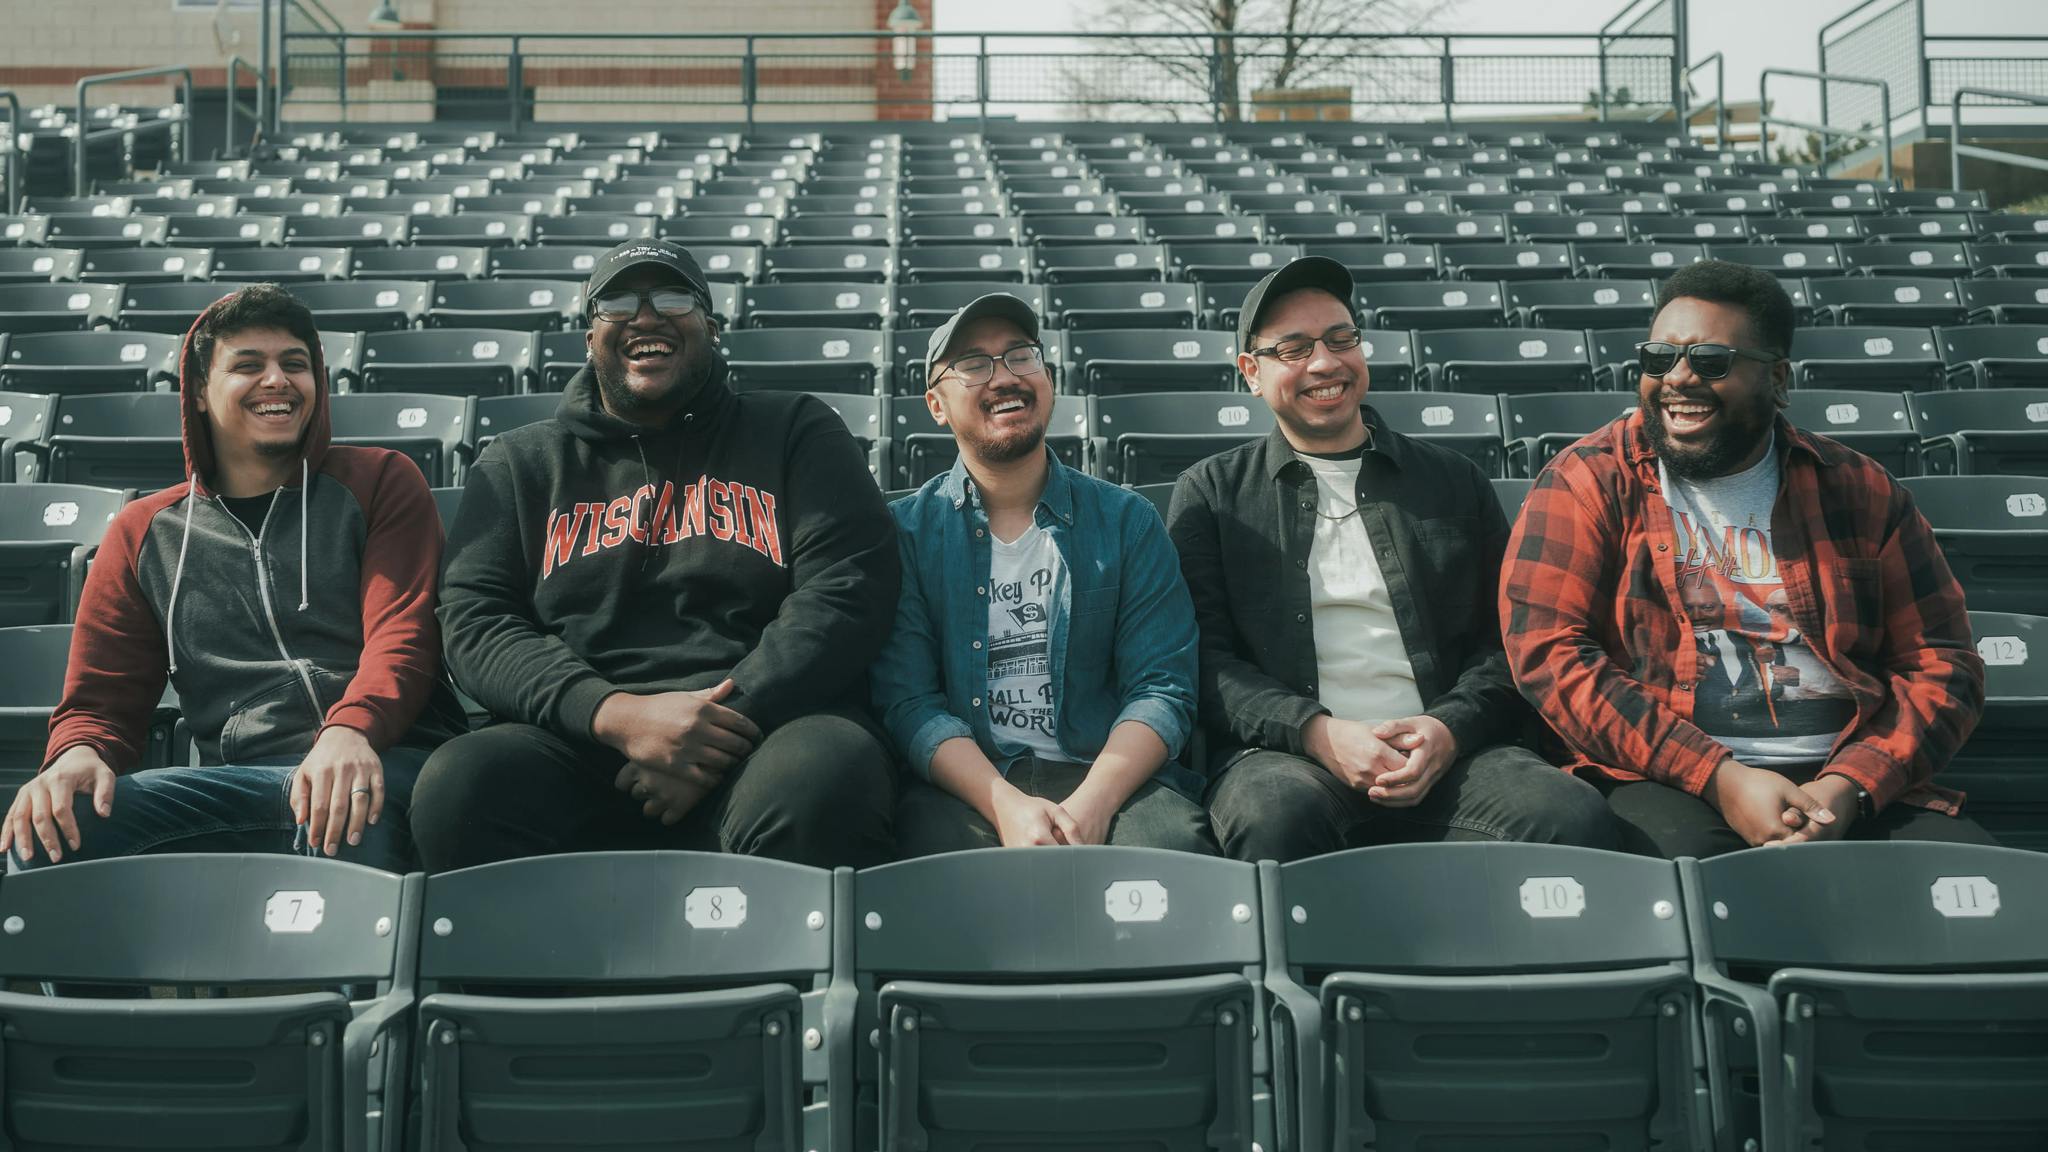 Action/Adventure drop lively pop-punk cover of Meet Me At Our Spot